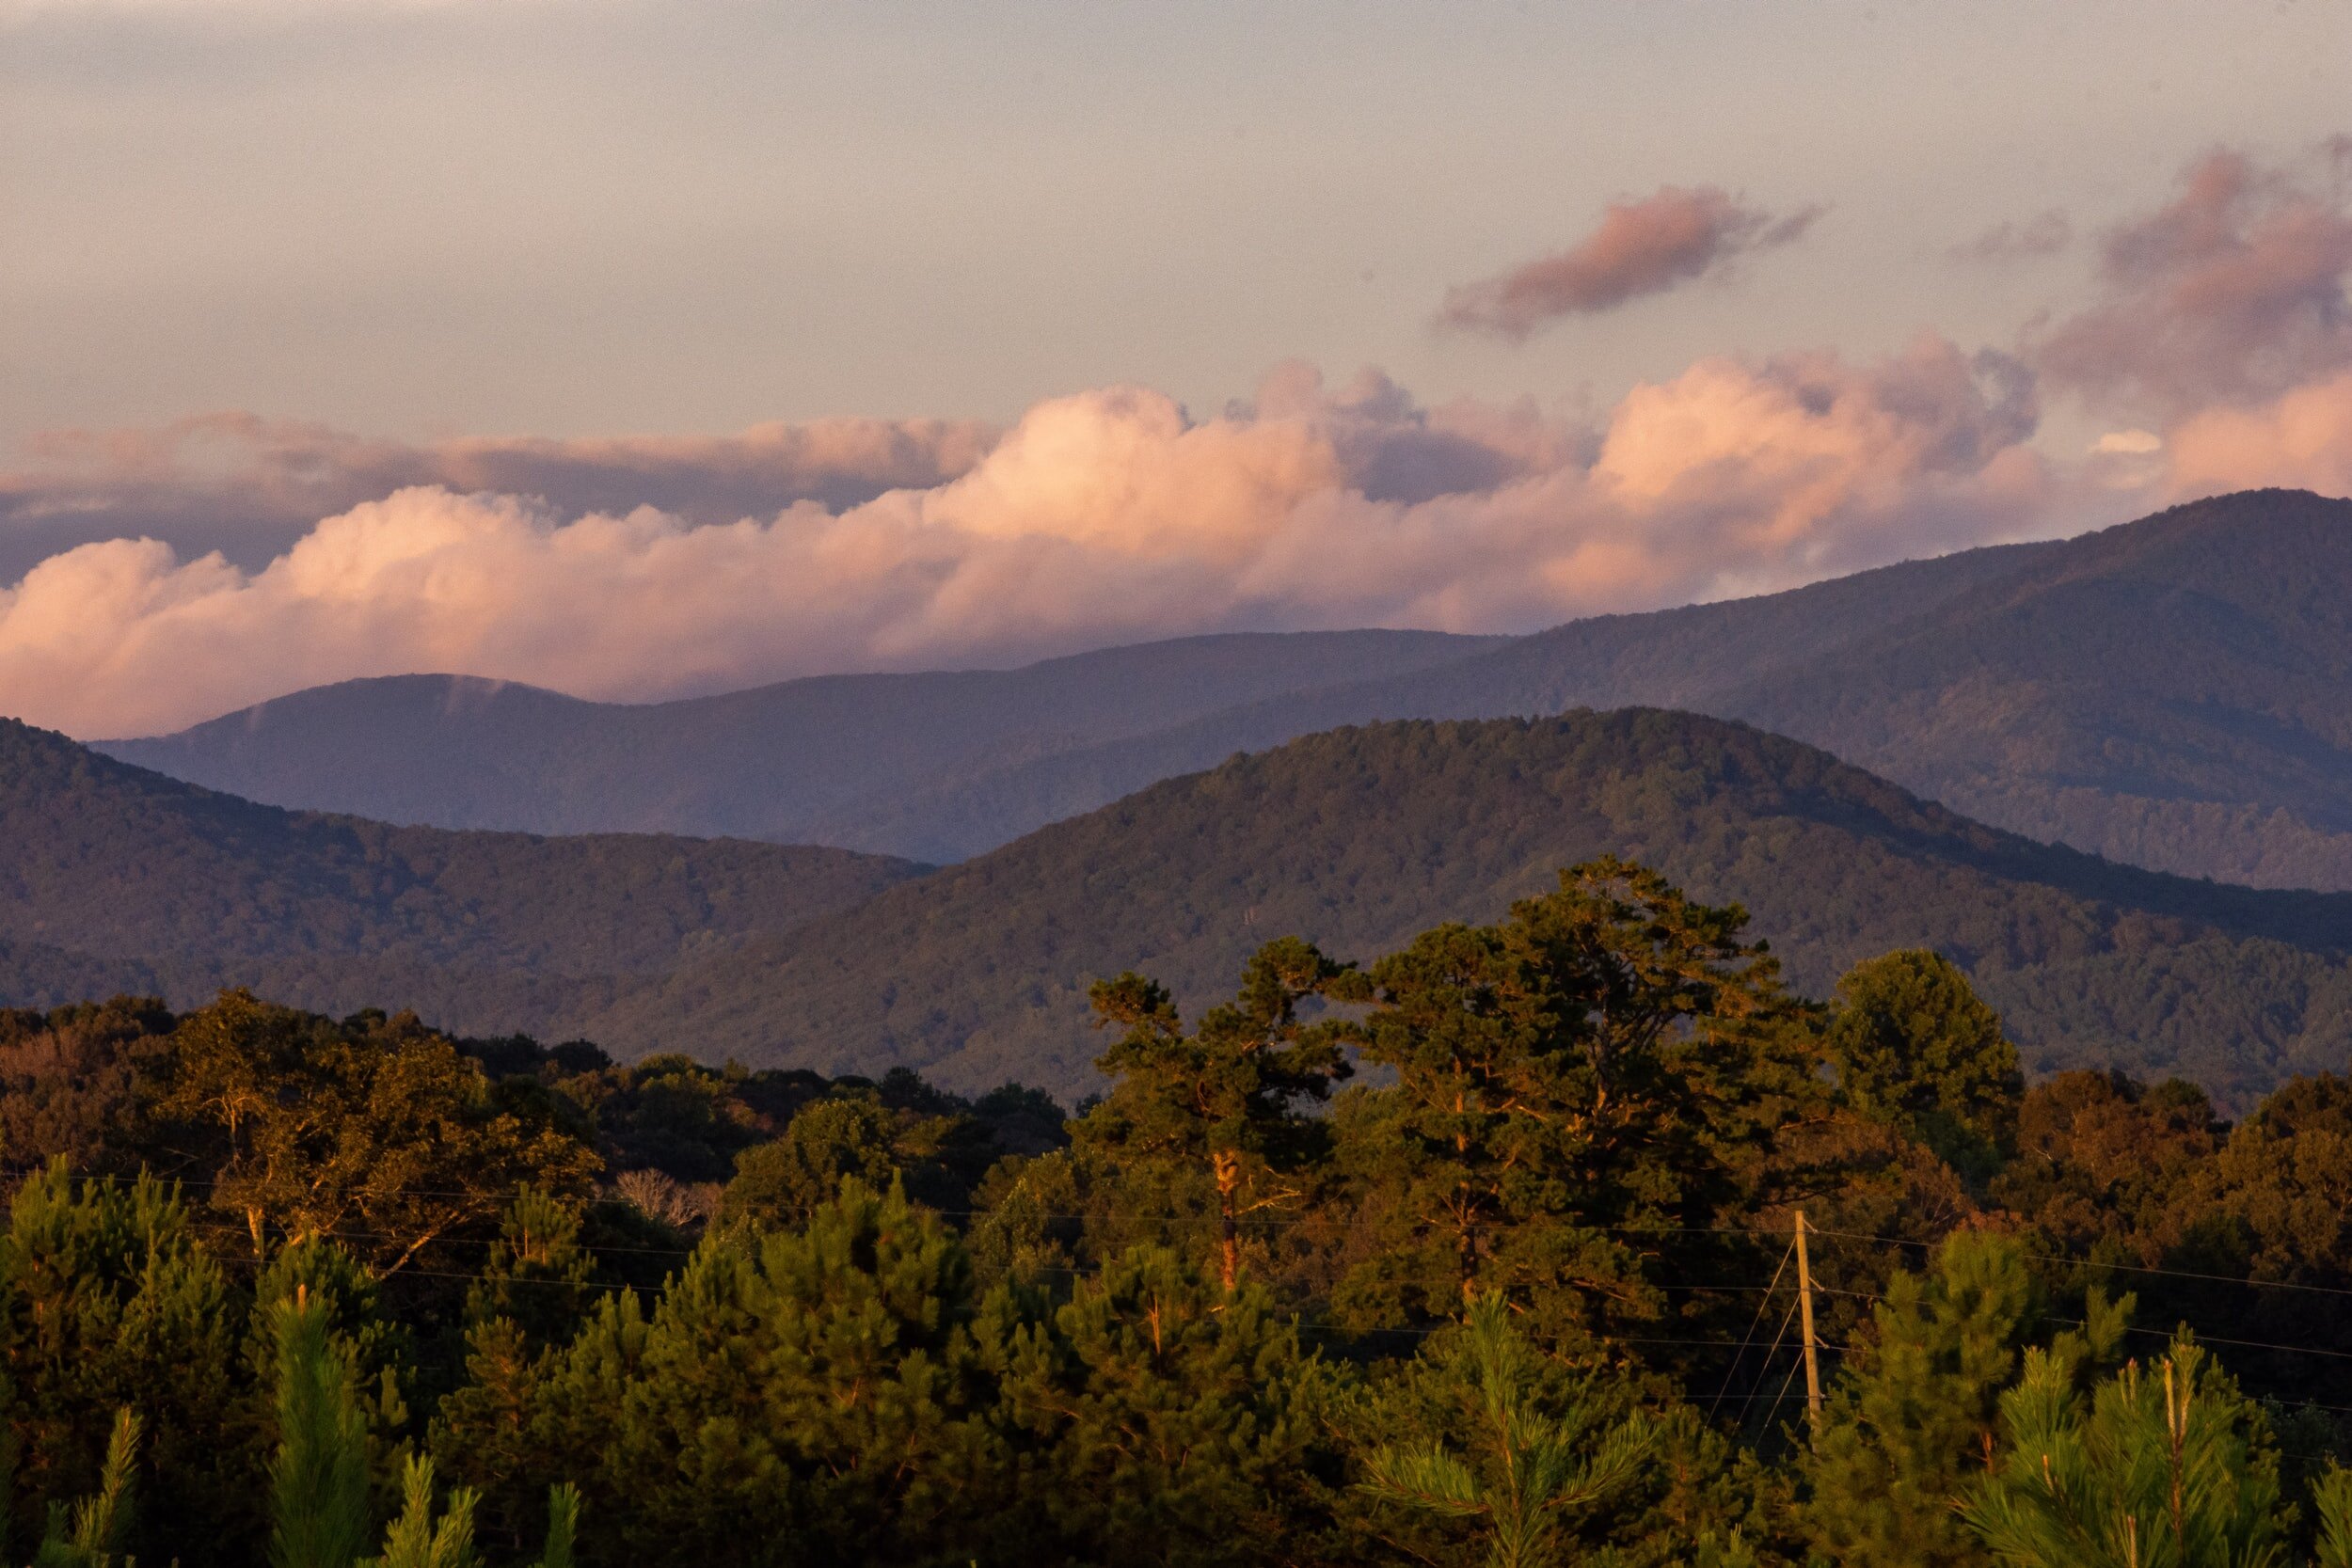 Transitioning the Appalachian region from extractive to sustainable industry